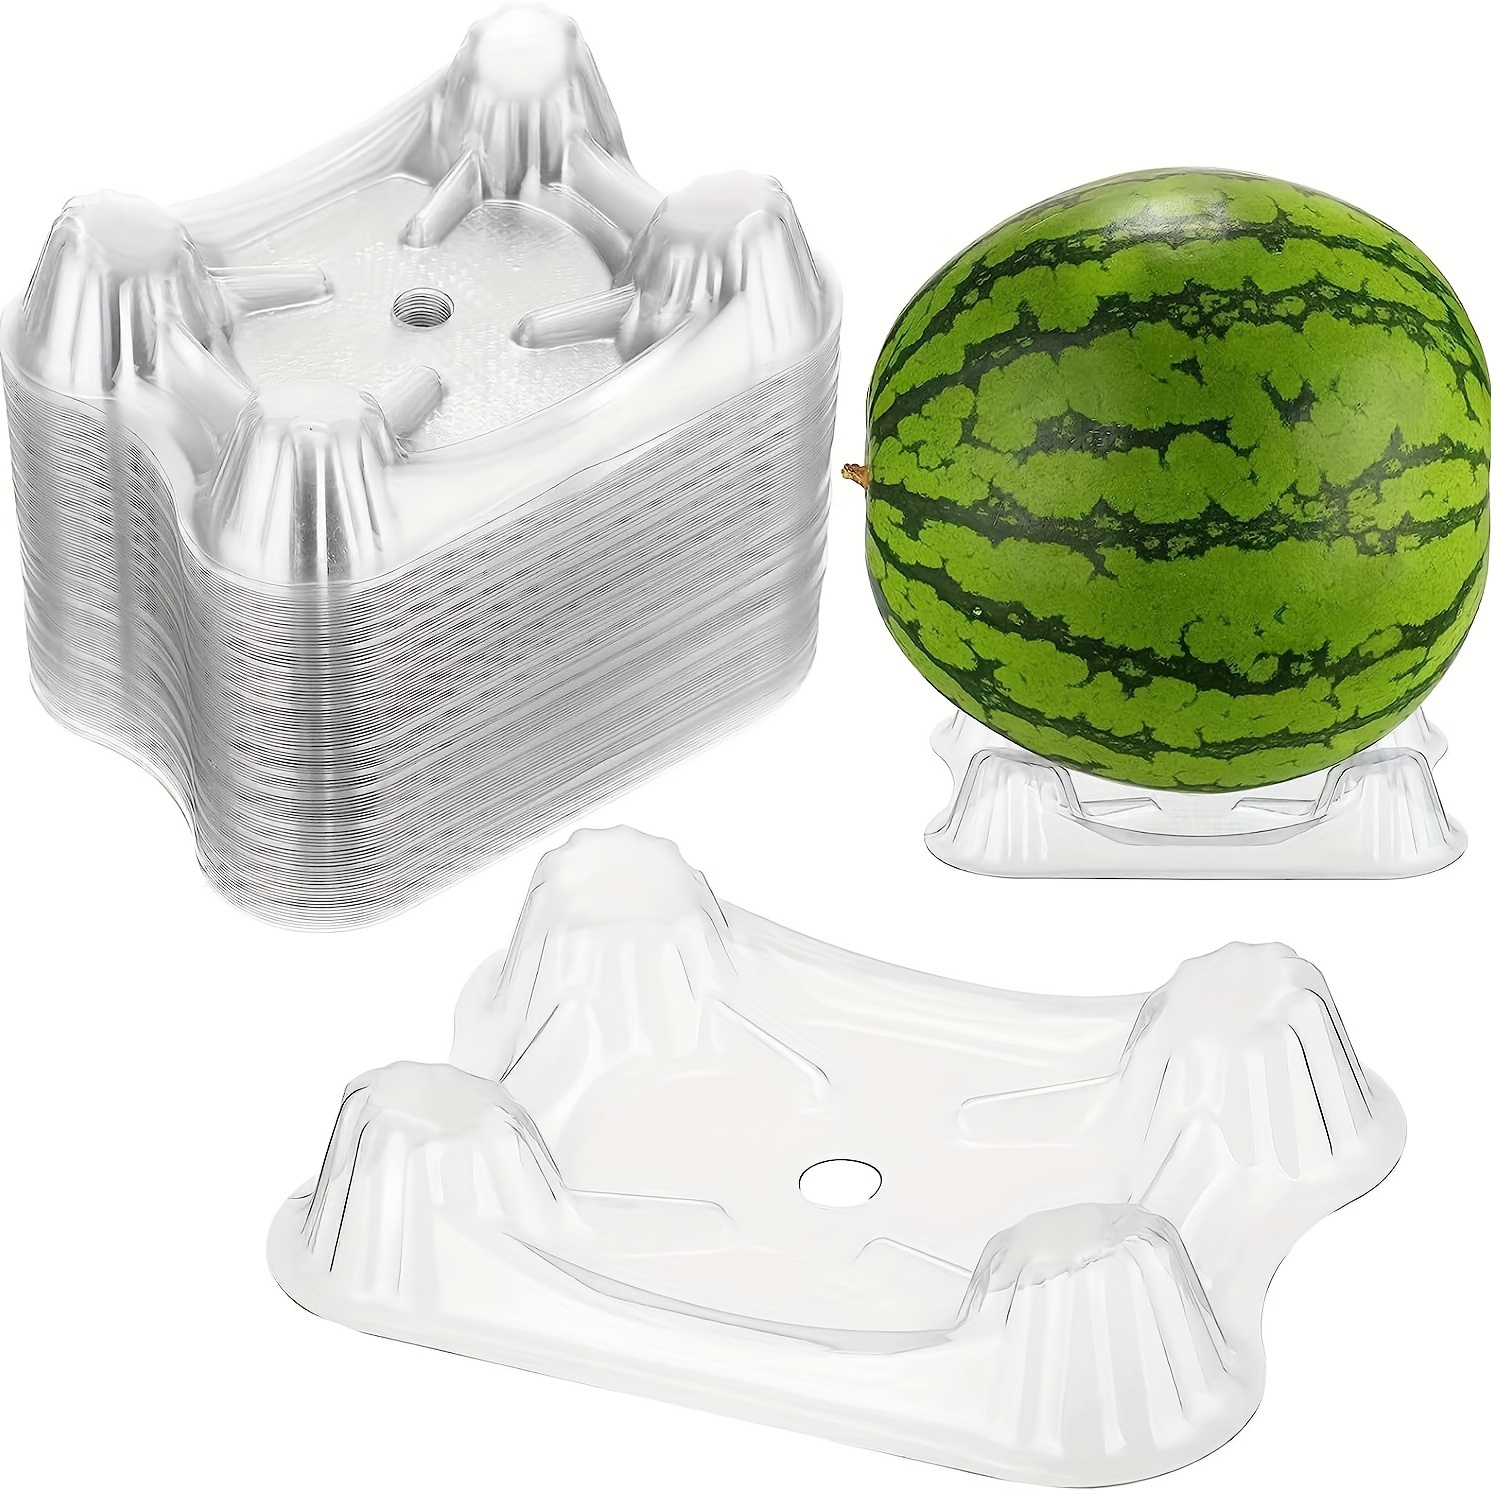 

50pcs, Watermelon Cantaloupe Melon Holder, Anti-rot Plastic Protection Pad For All Kinds Of Fruits And Vegetables For Home Garden, Farm Plantation Garden Supplies